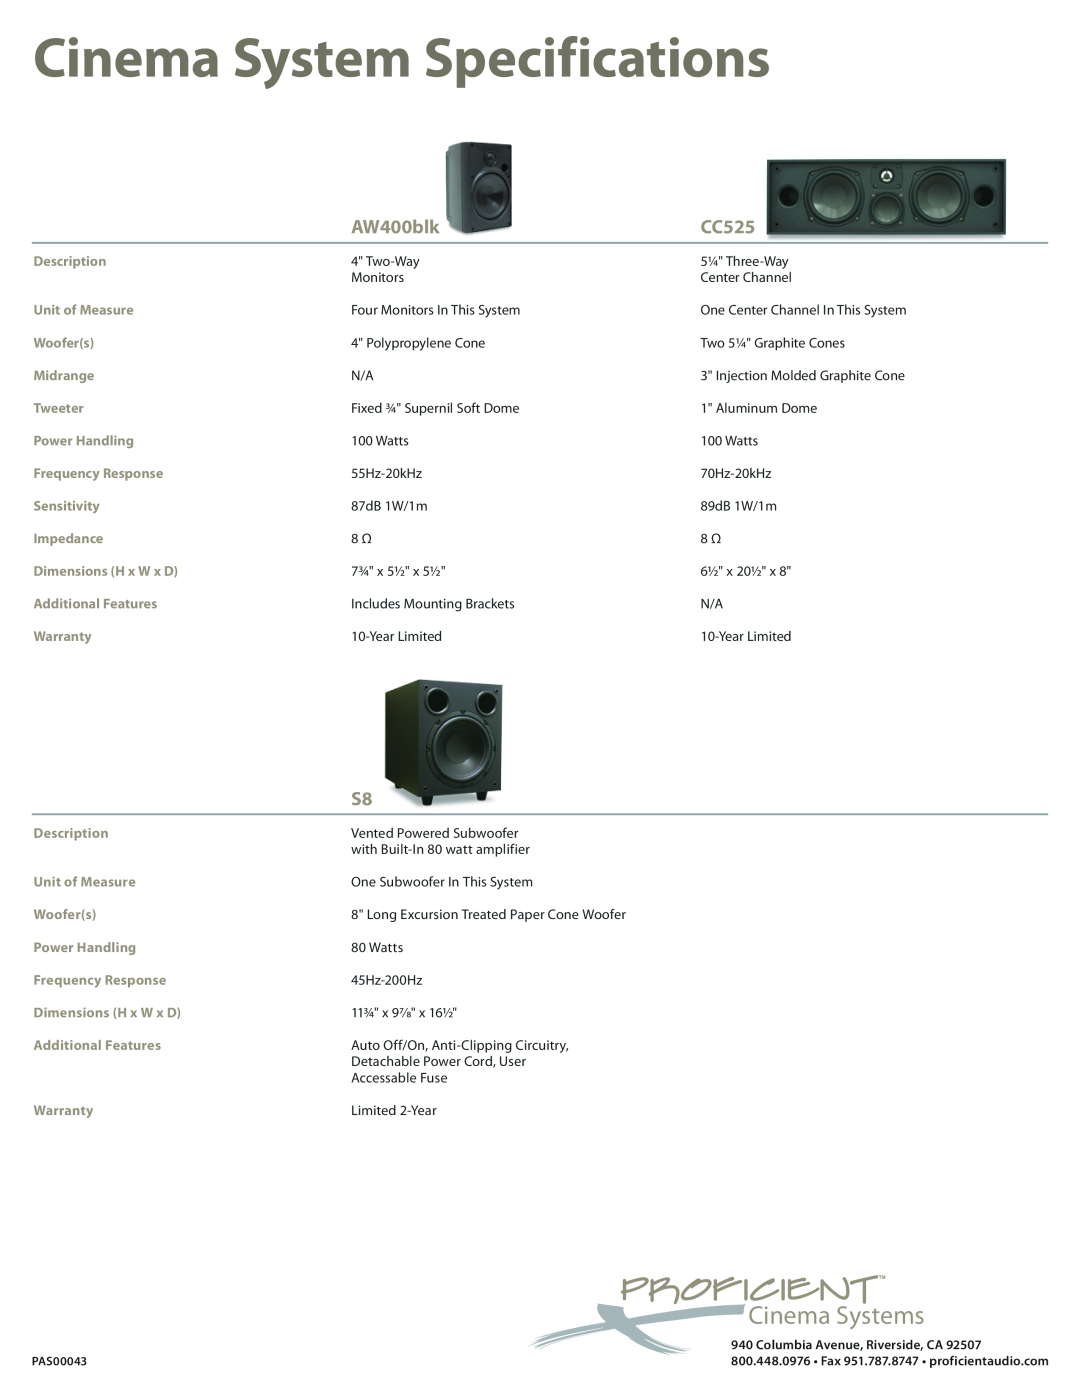 Proficient Audio Systems manual Cinema System Specifications, Cinema Systems, AW400blk, CC525 